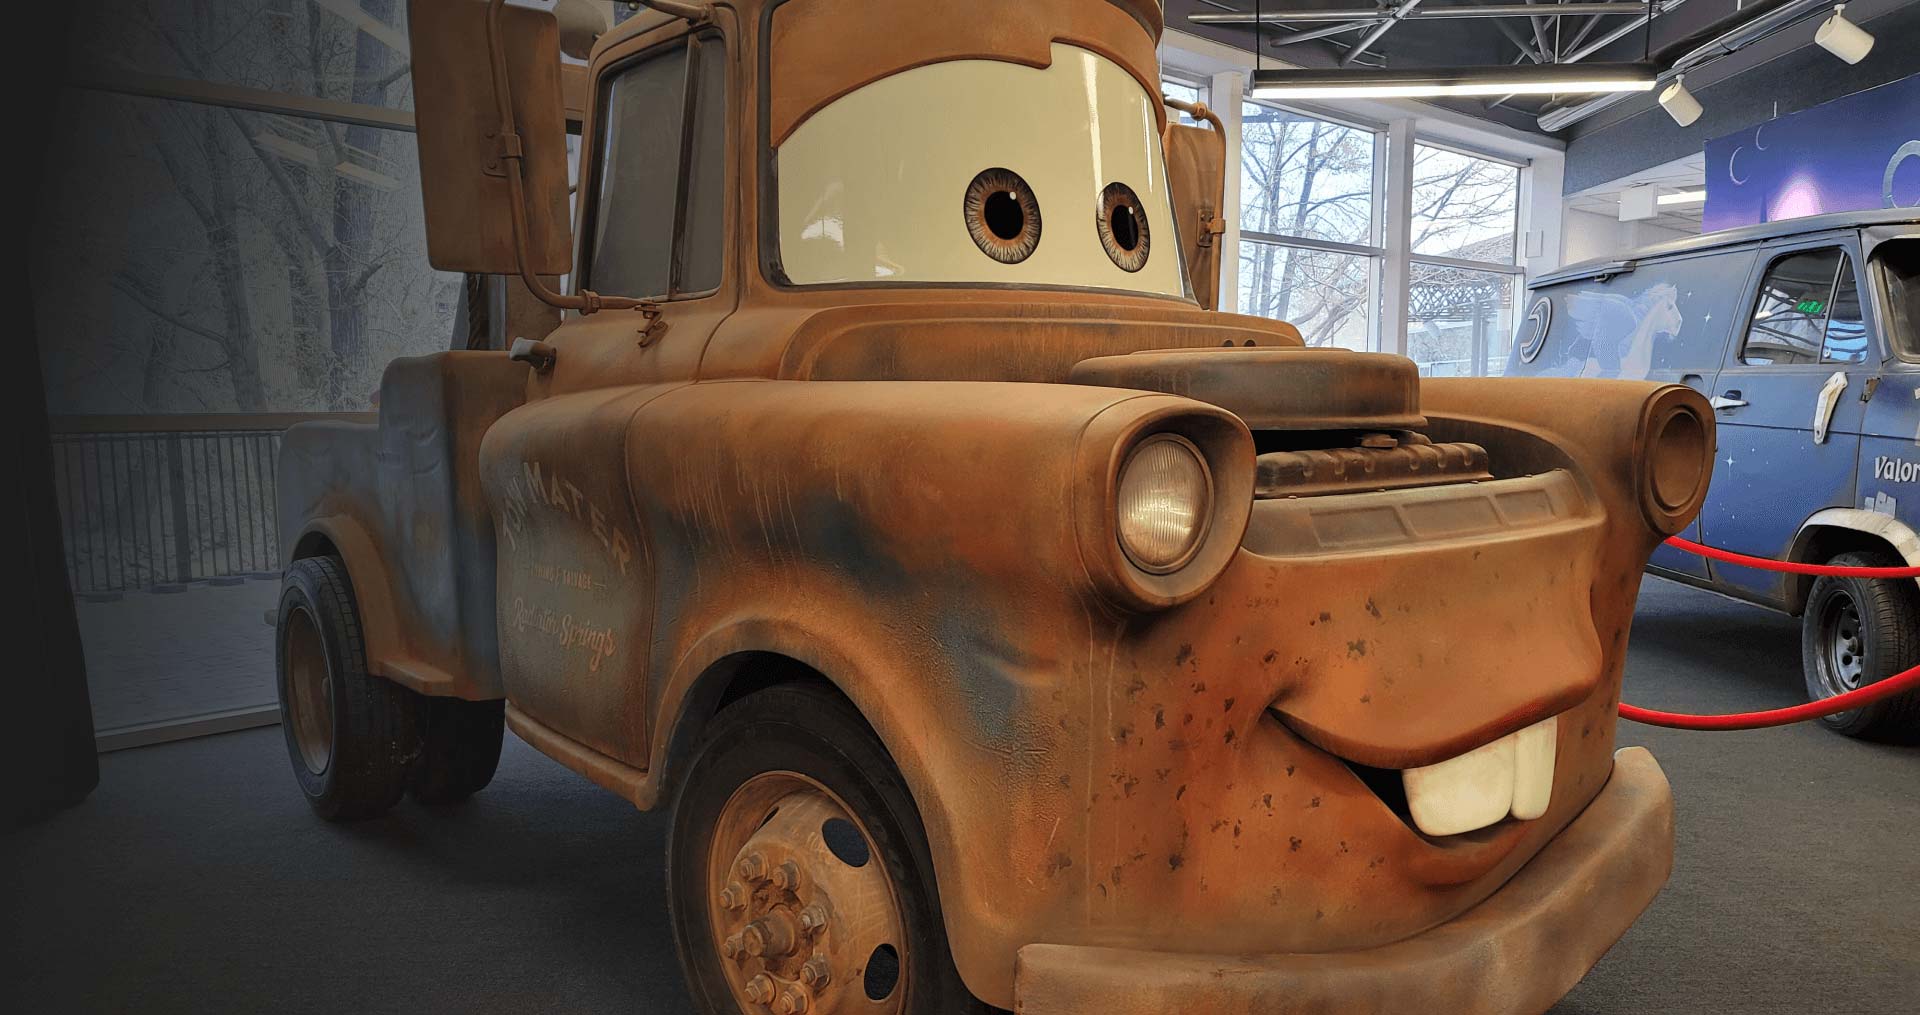 https://automuseum.org/wp-content/uploads/2022/07/tow-mater.jpg